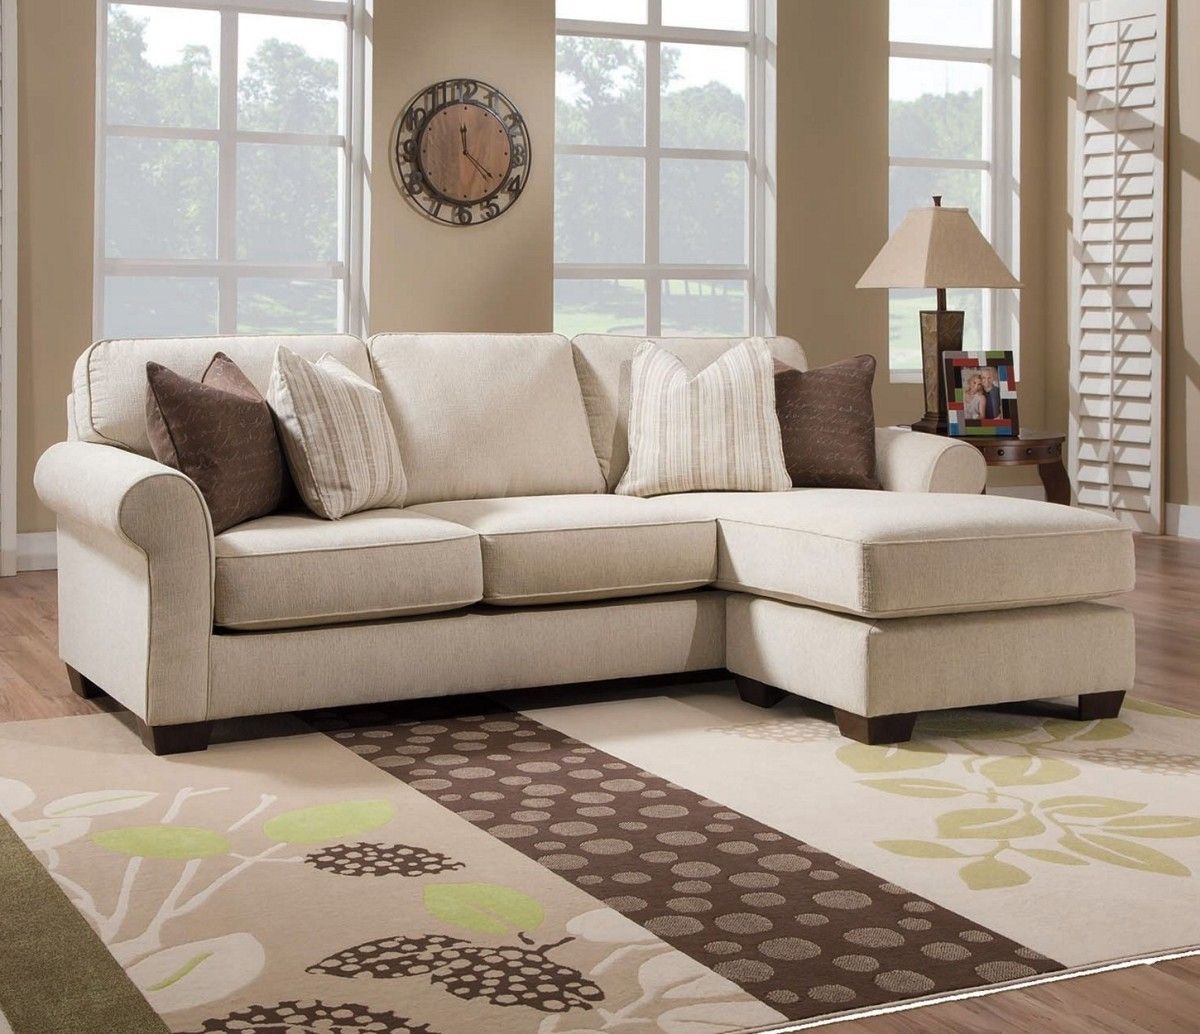 Sectional Sofas For Small Spaces Canada On With Hd Resolution For Canada Sectional Sofas For Small Spaces 